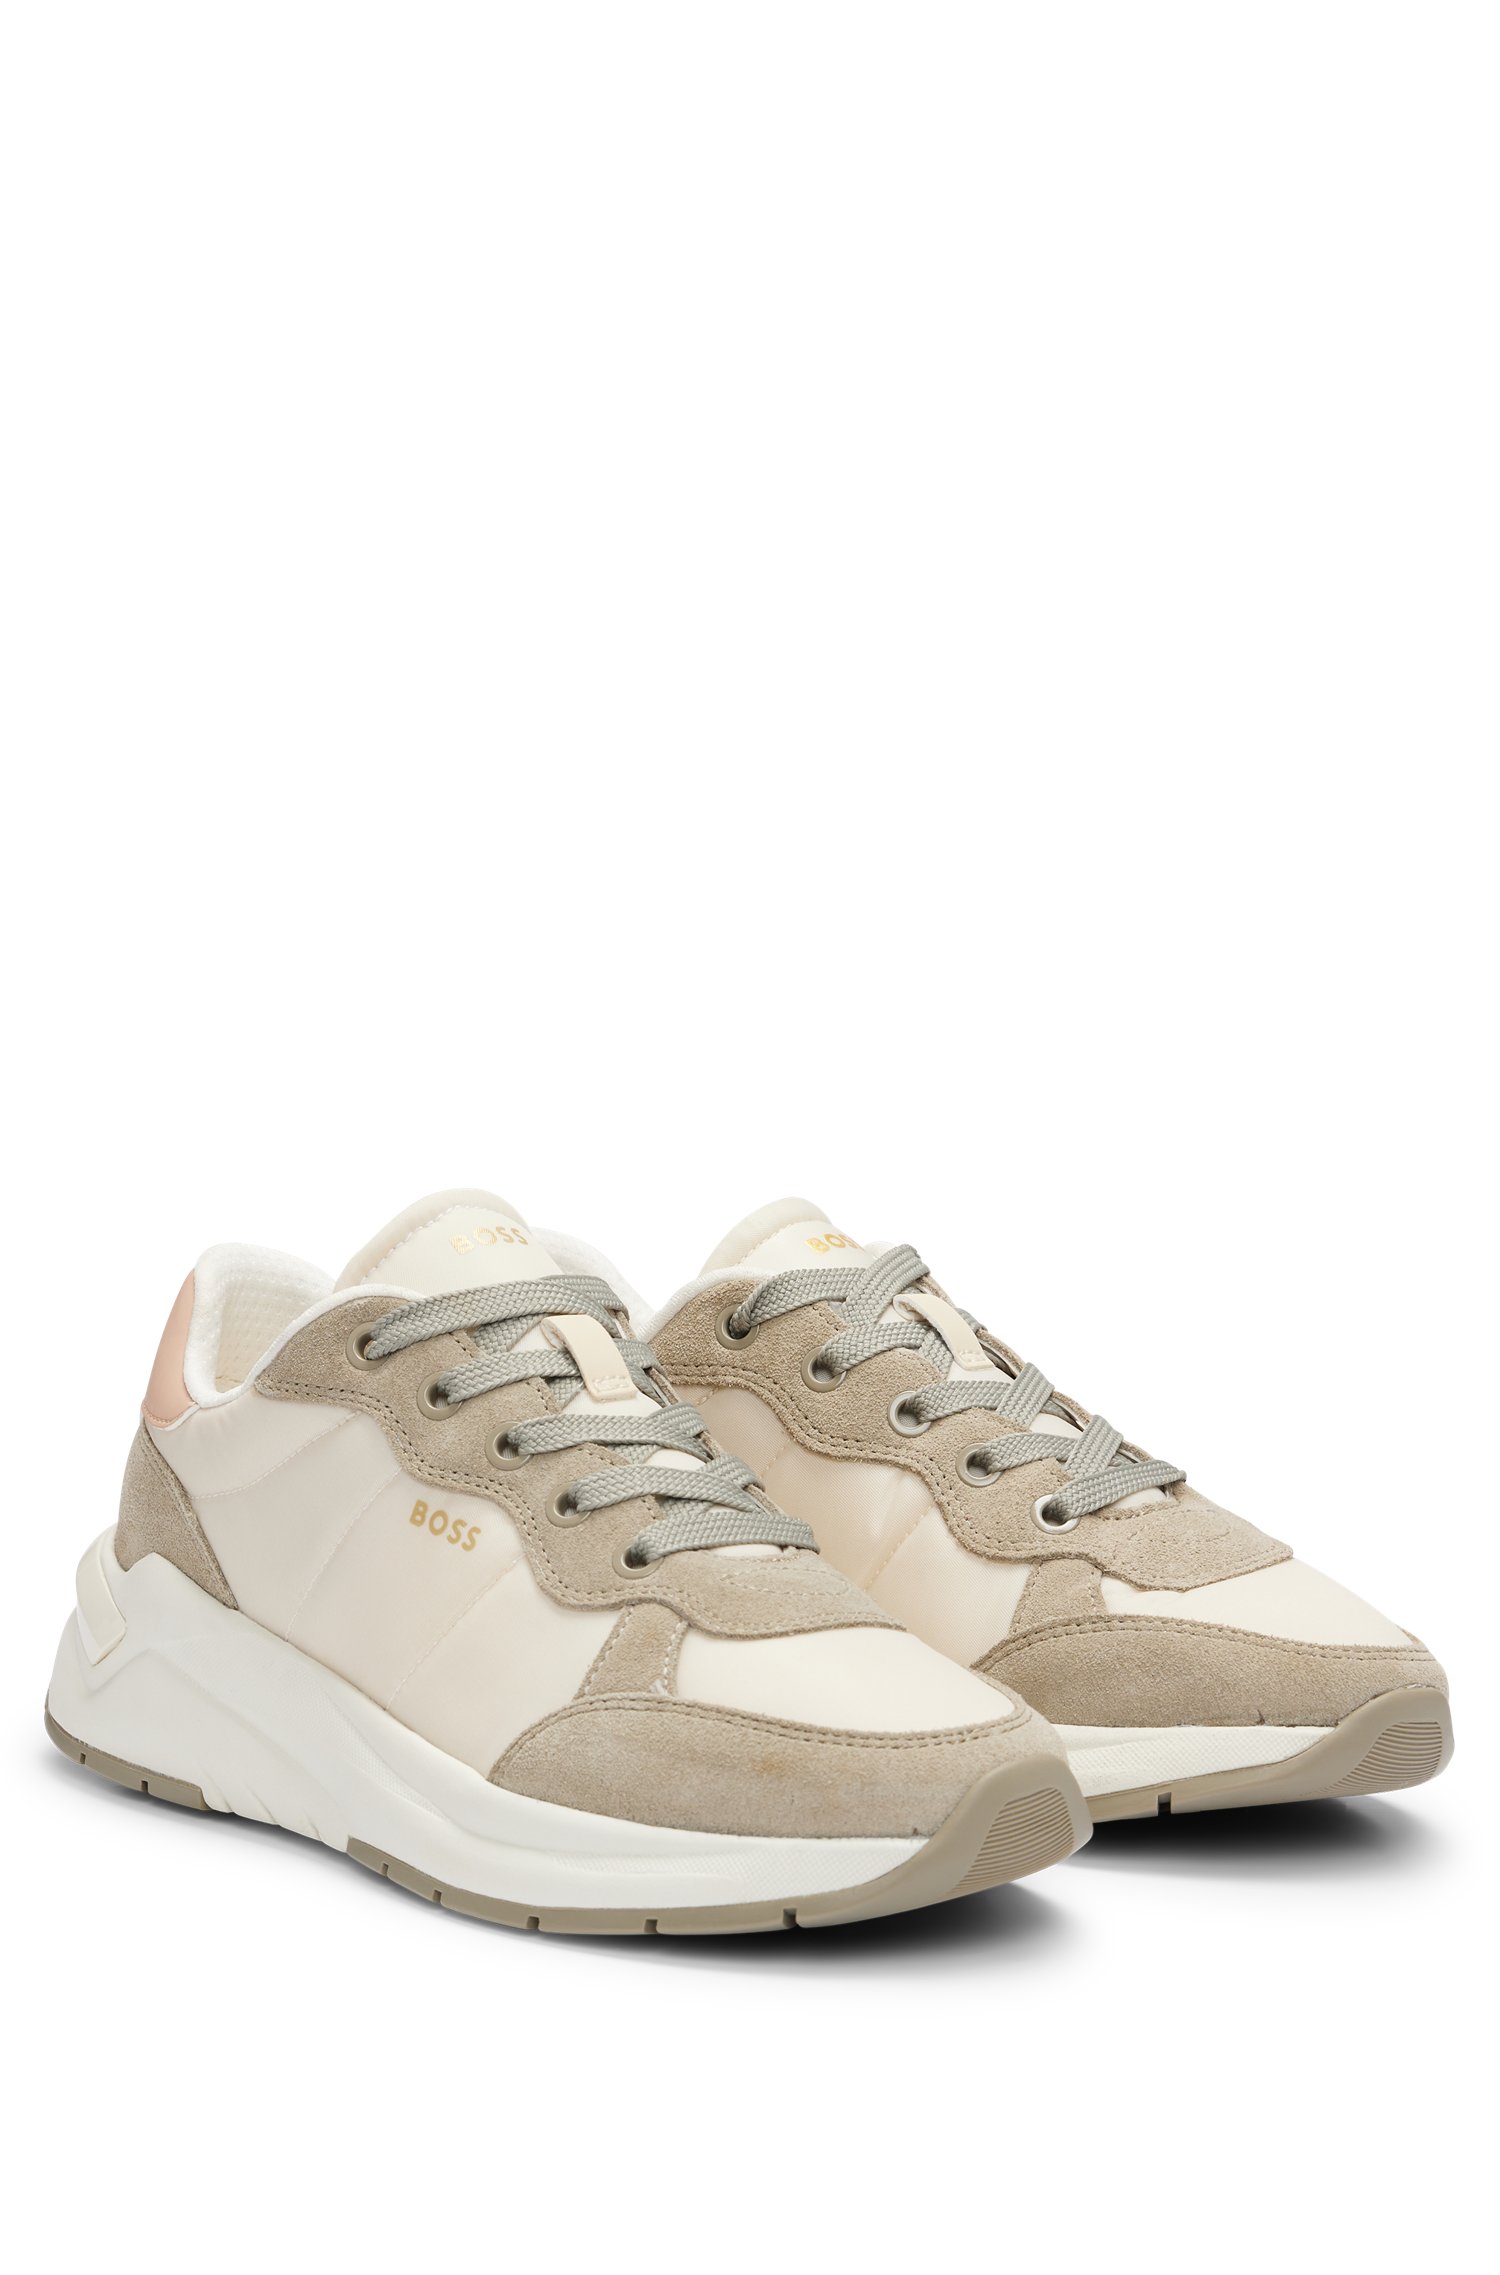 Mixed-material trainers with suede and leather